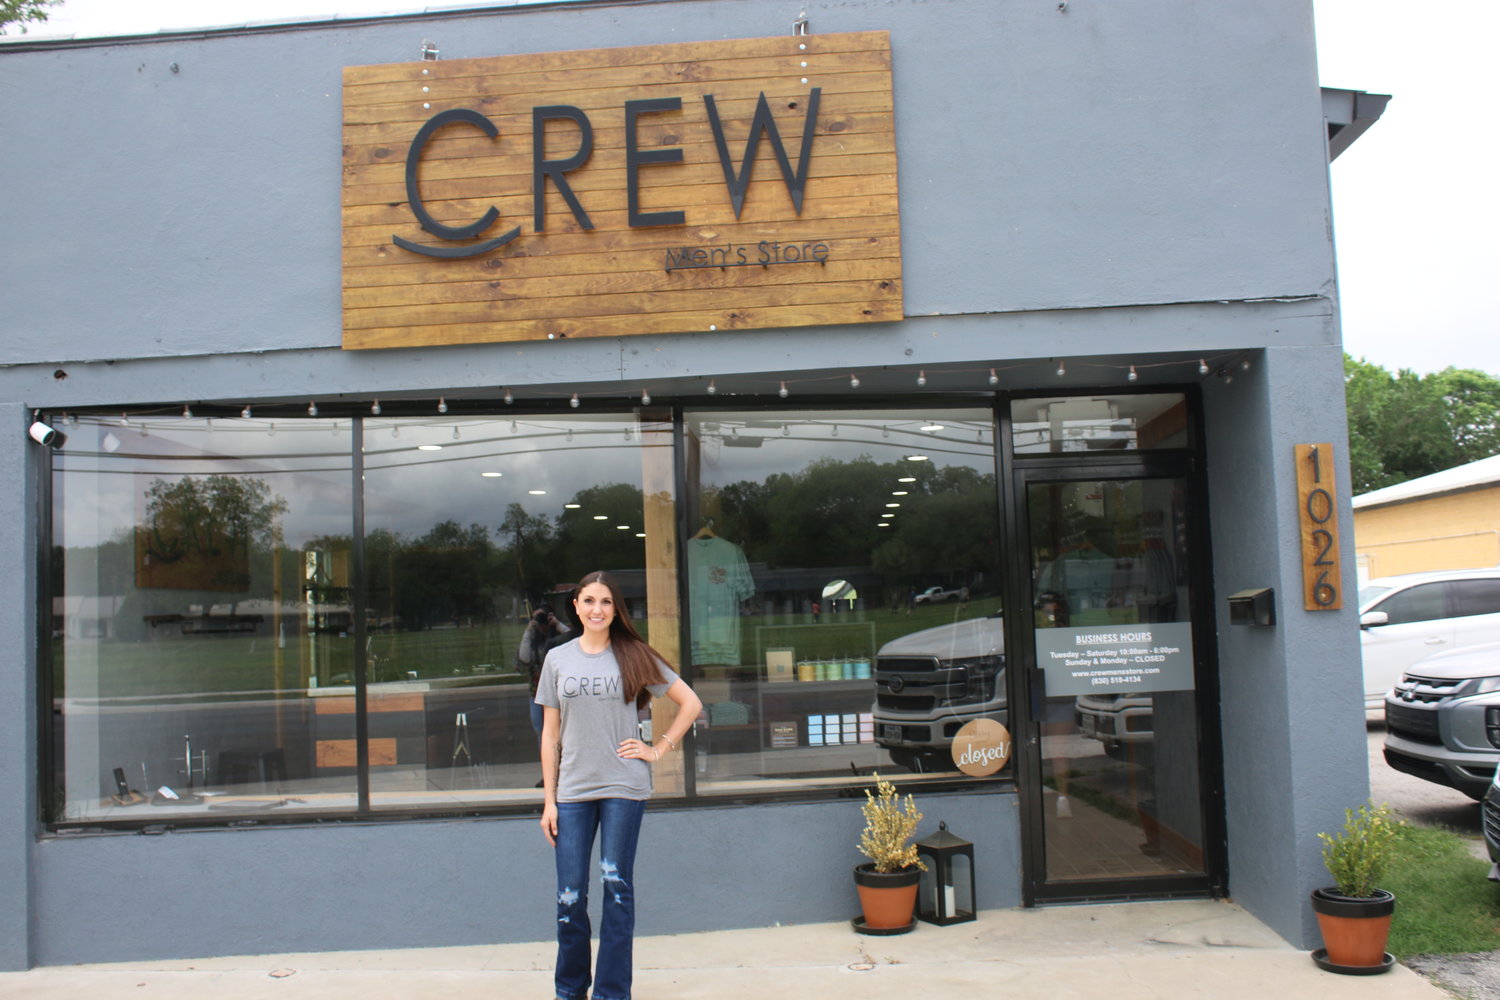 Kayla Craven welcomes the Gonzales County community to her Crew Men’s Store, located at 1026 Saint Louis St. Her grand opening event will be May 14.